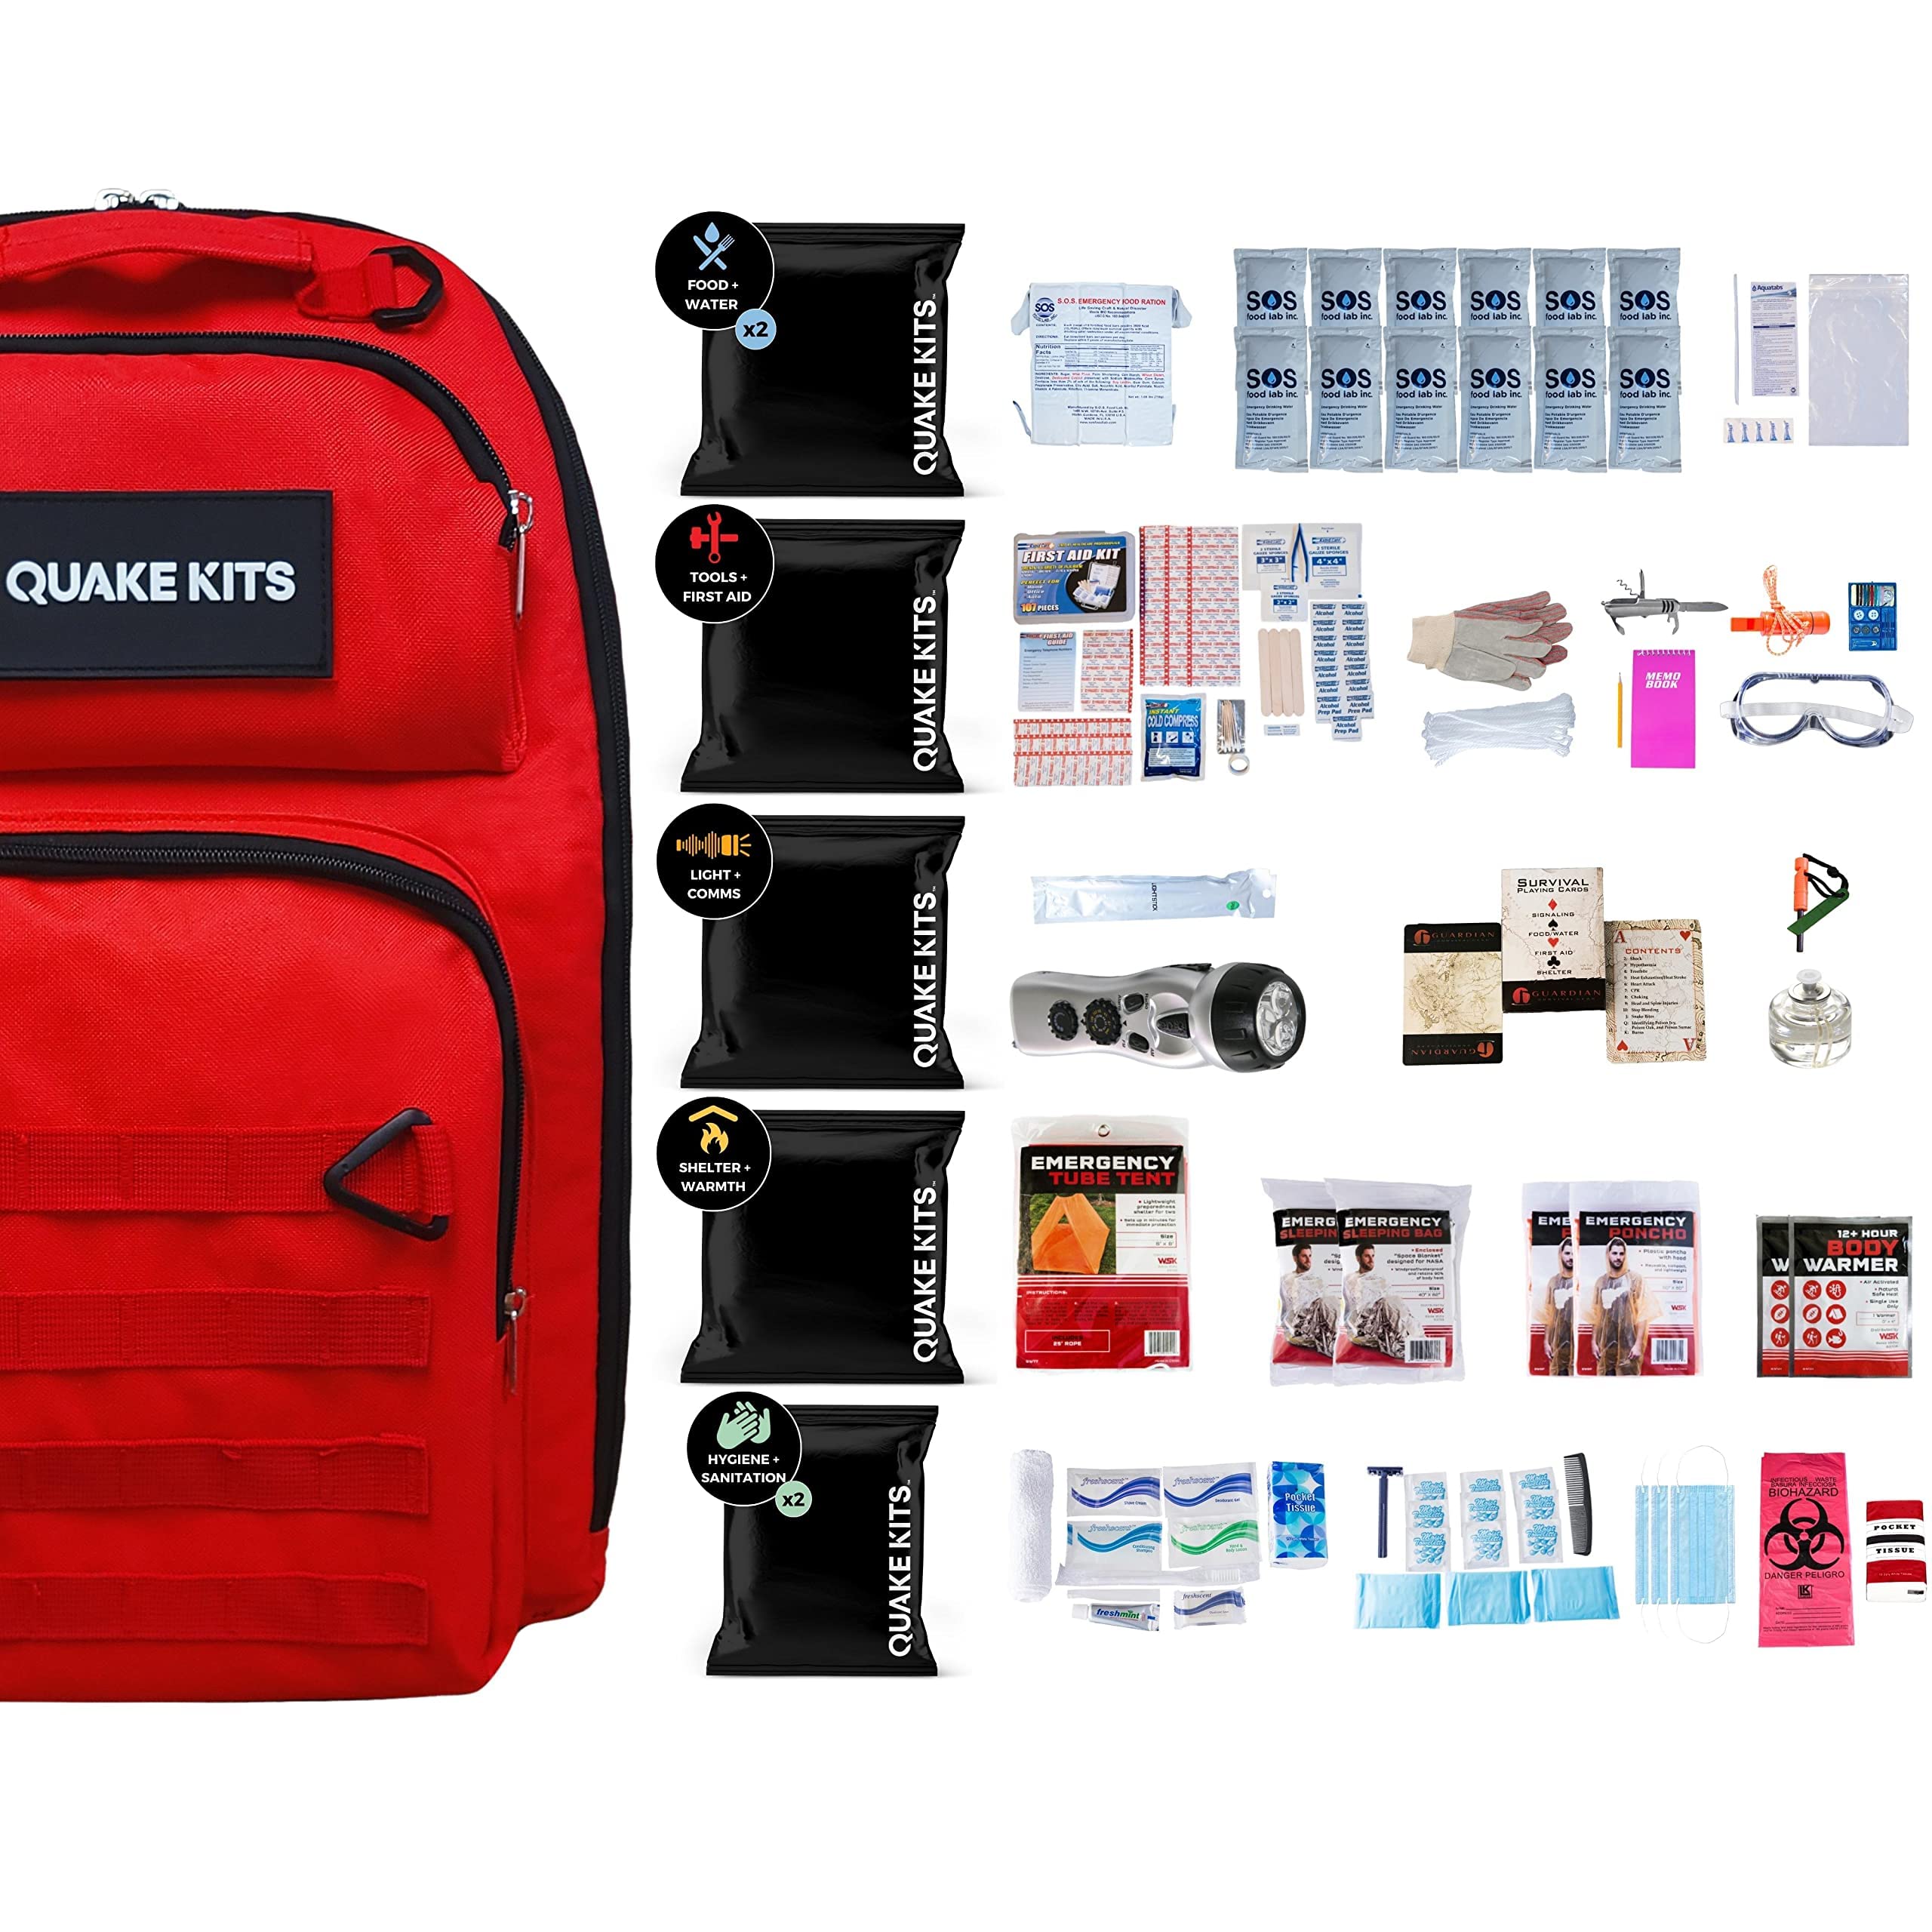 Complete Earthquake Bag - Most popular emergency kit for hurricanes, fires,  earthquakes, floods + other disasters (4 person, 3 days) - Walmart.com